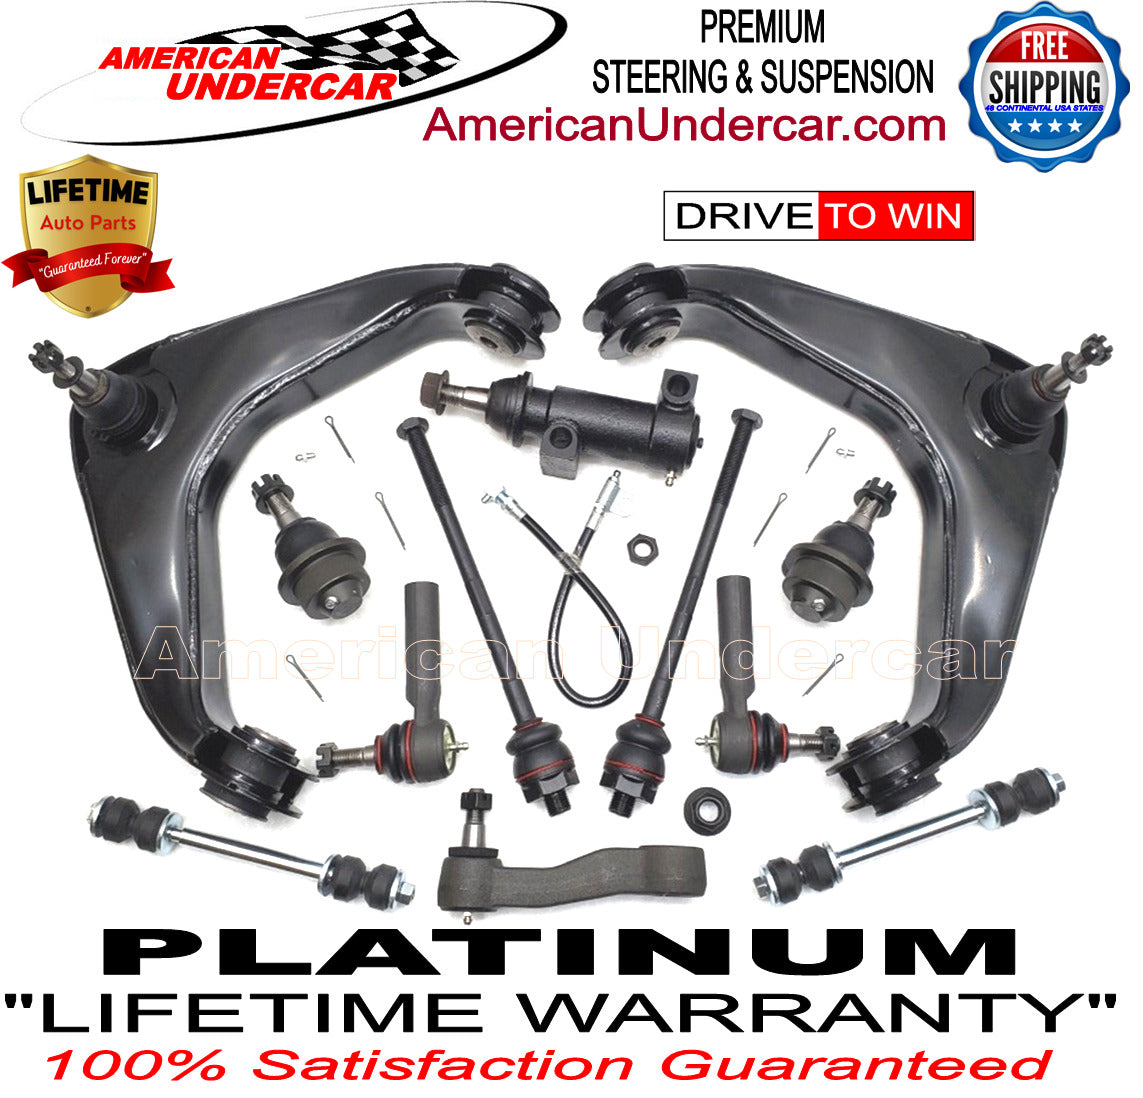 Lifetime Steering and Suspension Kit for 2001-2010 Chevrolet Silverado 3500HD 2WD